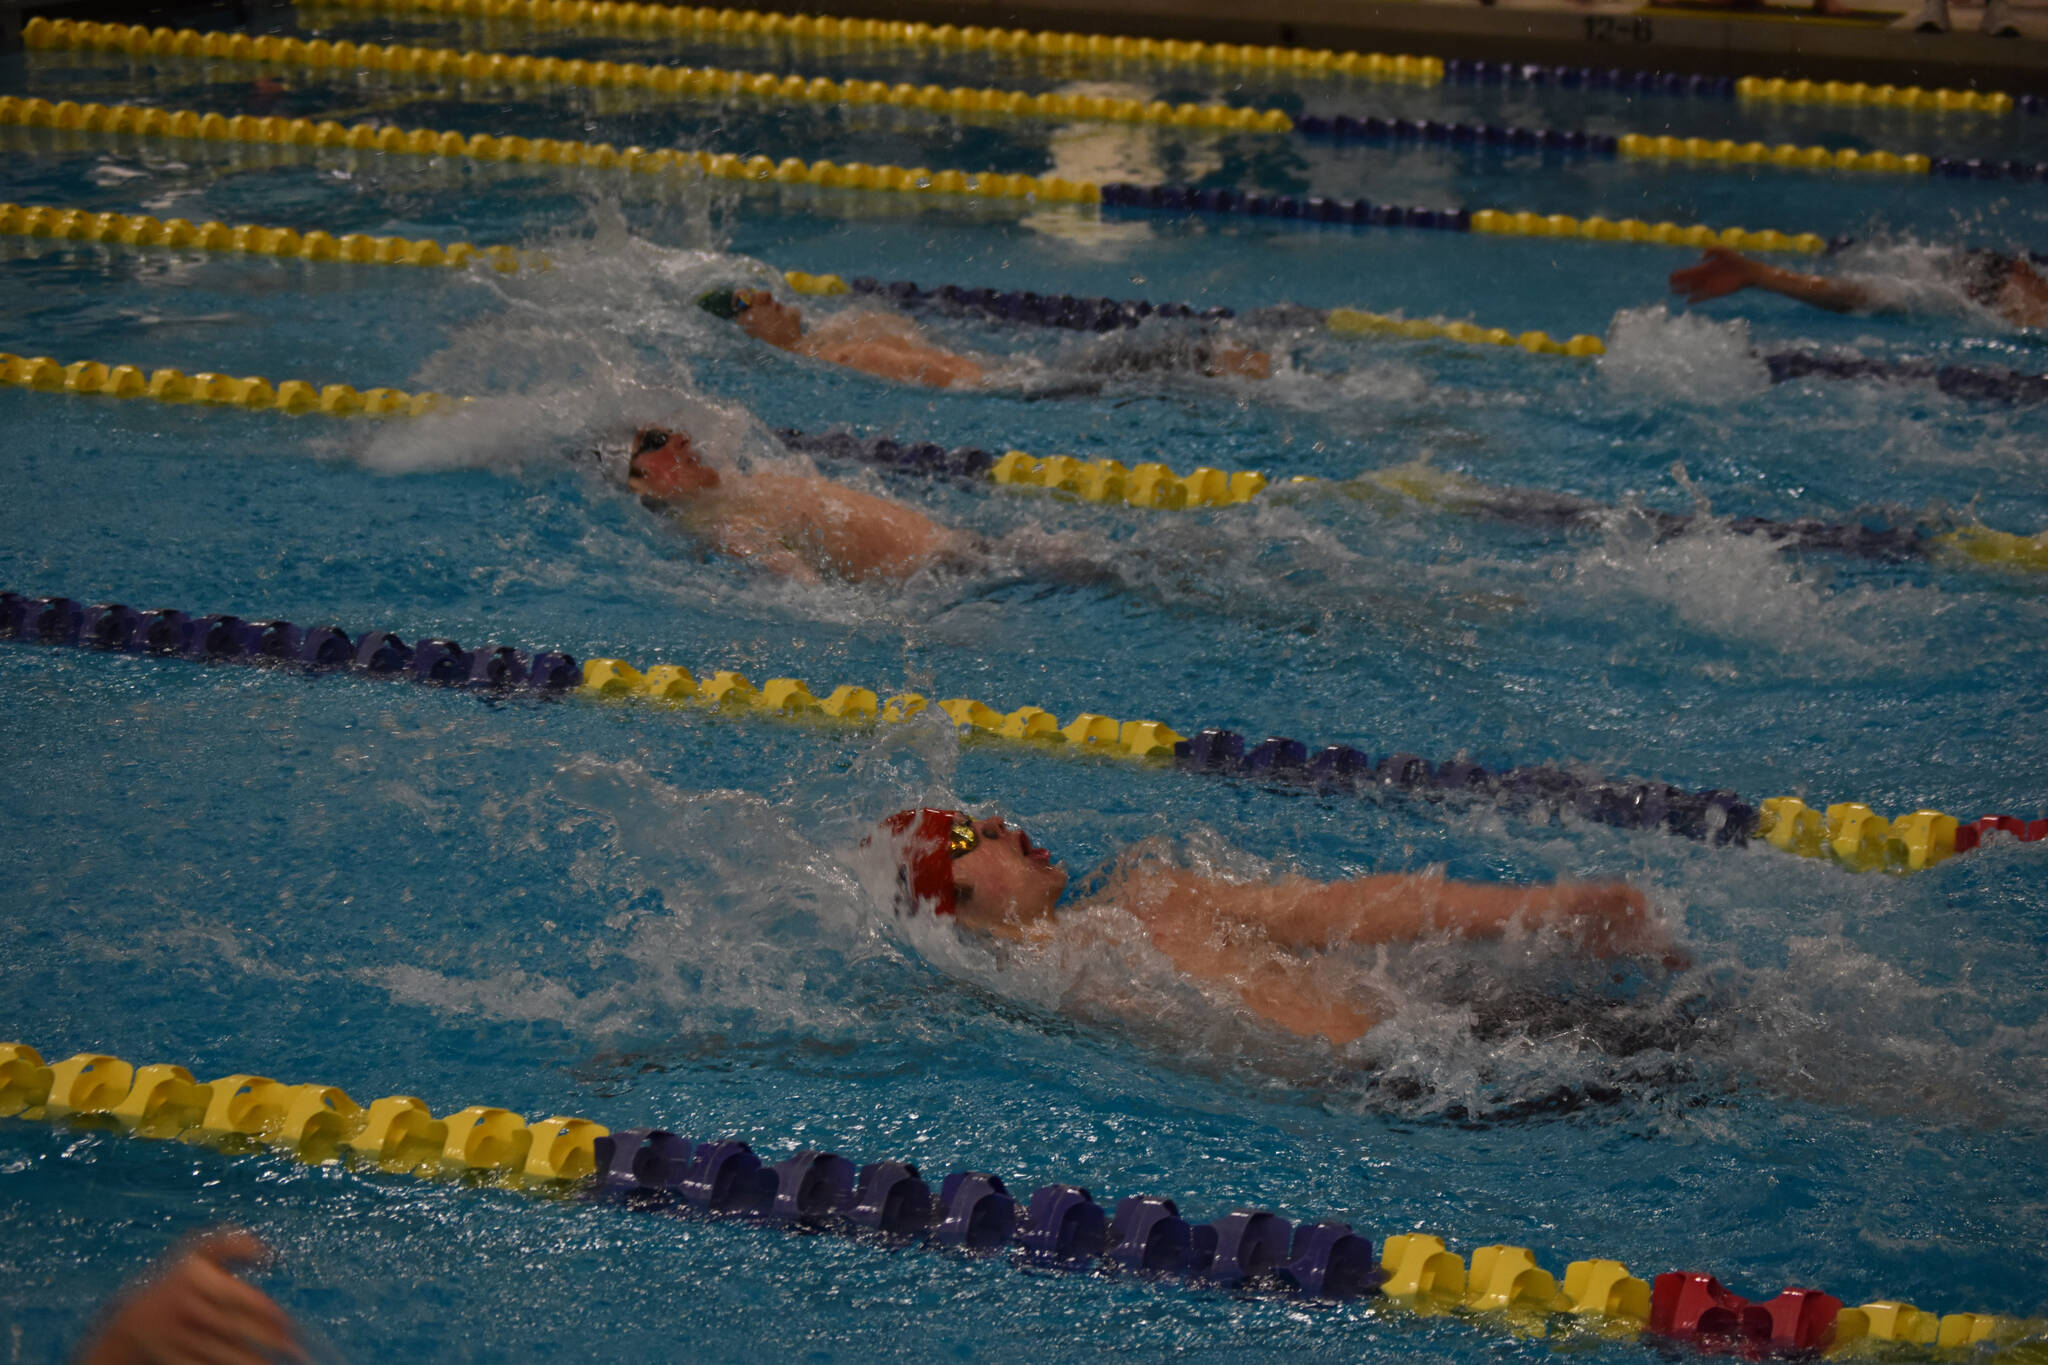 Samuel Anderson (closest), of Kenai, Wesley Mank, of Eagle River, and William Kitchen, of Service High School, swim the 100-yard backstroke during finals at the ASAA State Swim & Dive Championships on Saturday, Nov. 5, 2022, at Bartlett High School in Anchorage, Alaska. (Jake Dye/Peninsula Clarion)